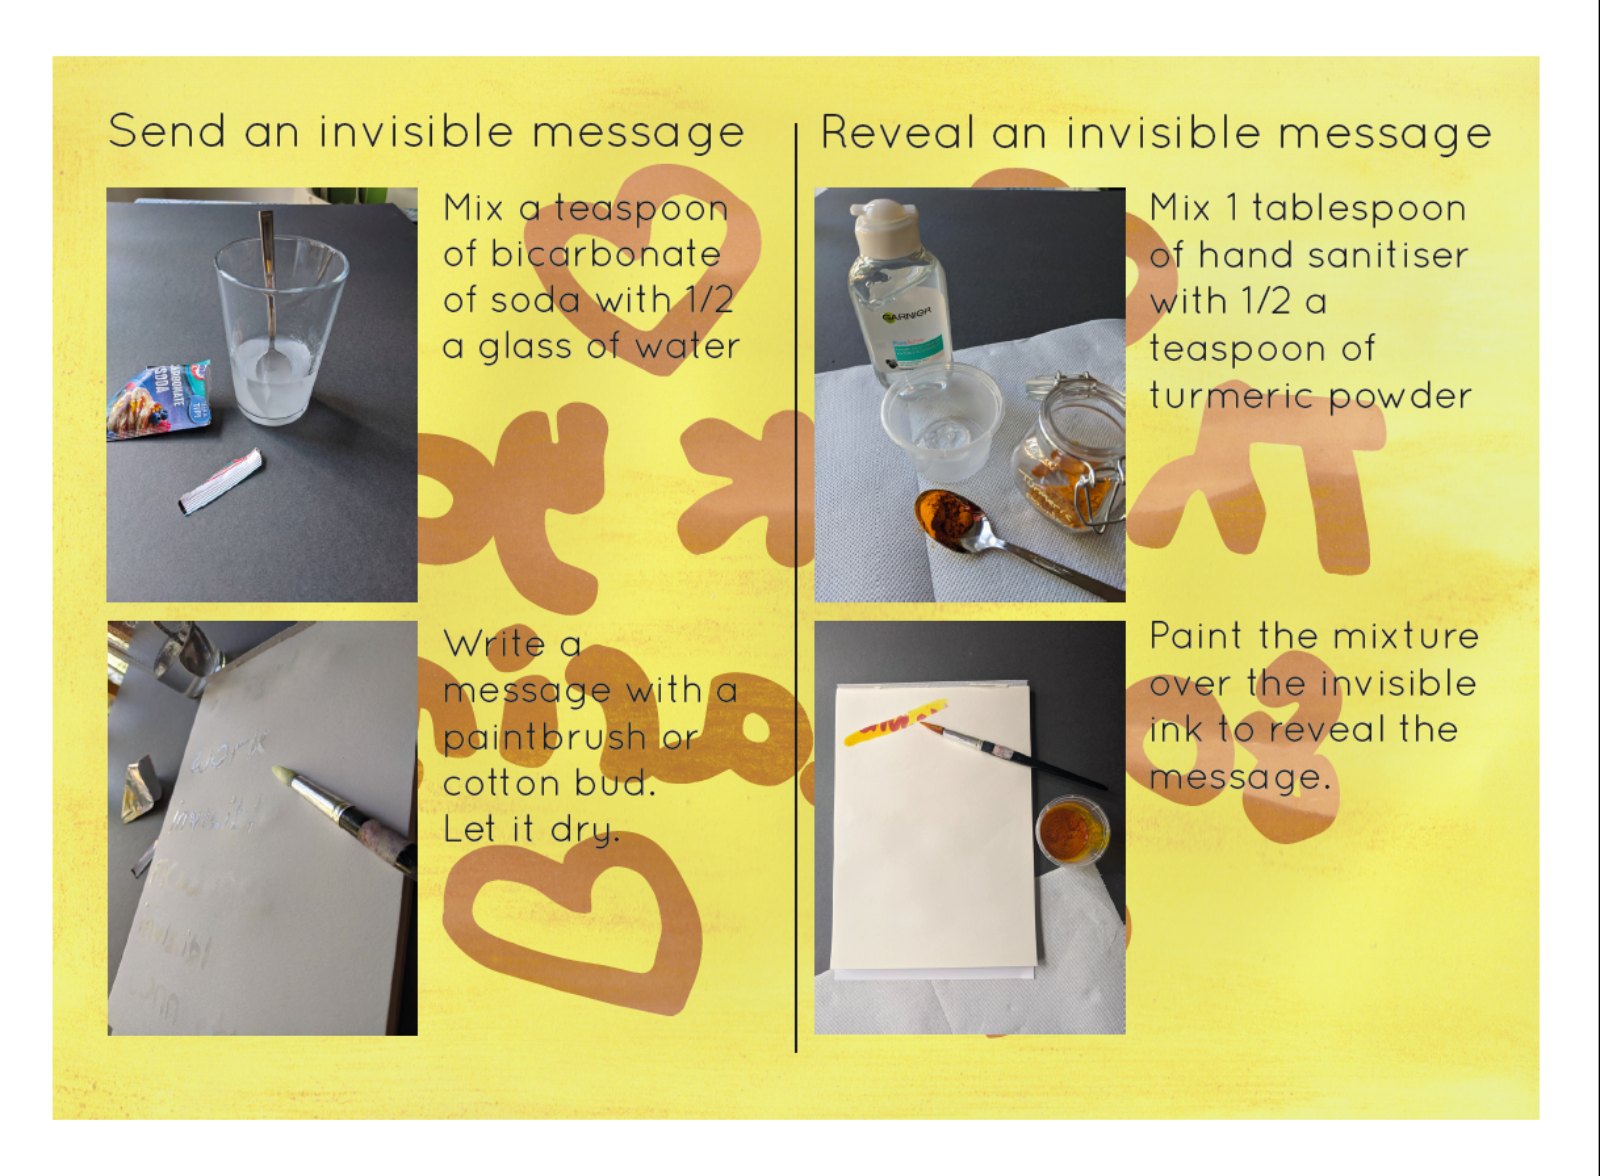 Instructions on how to send an invisible message.